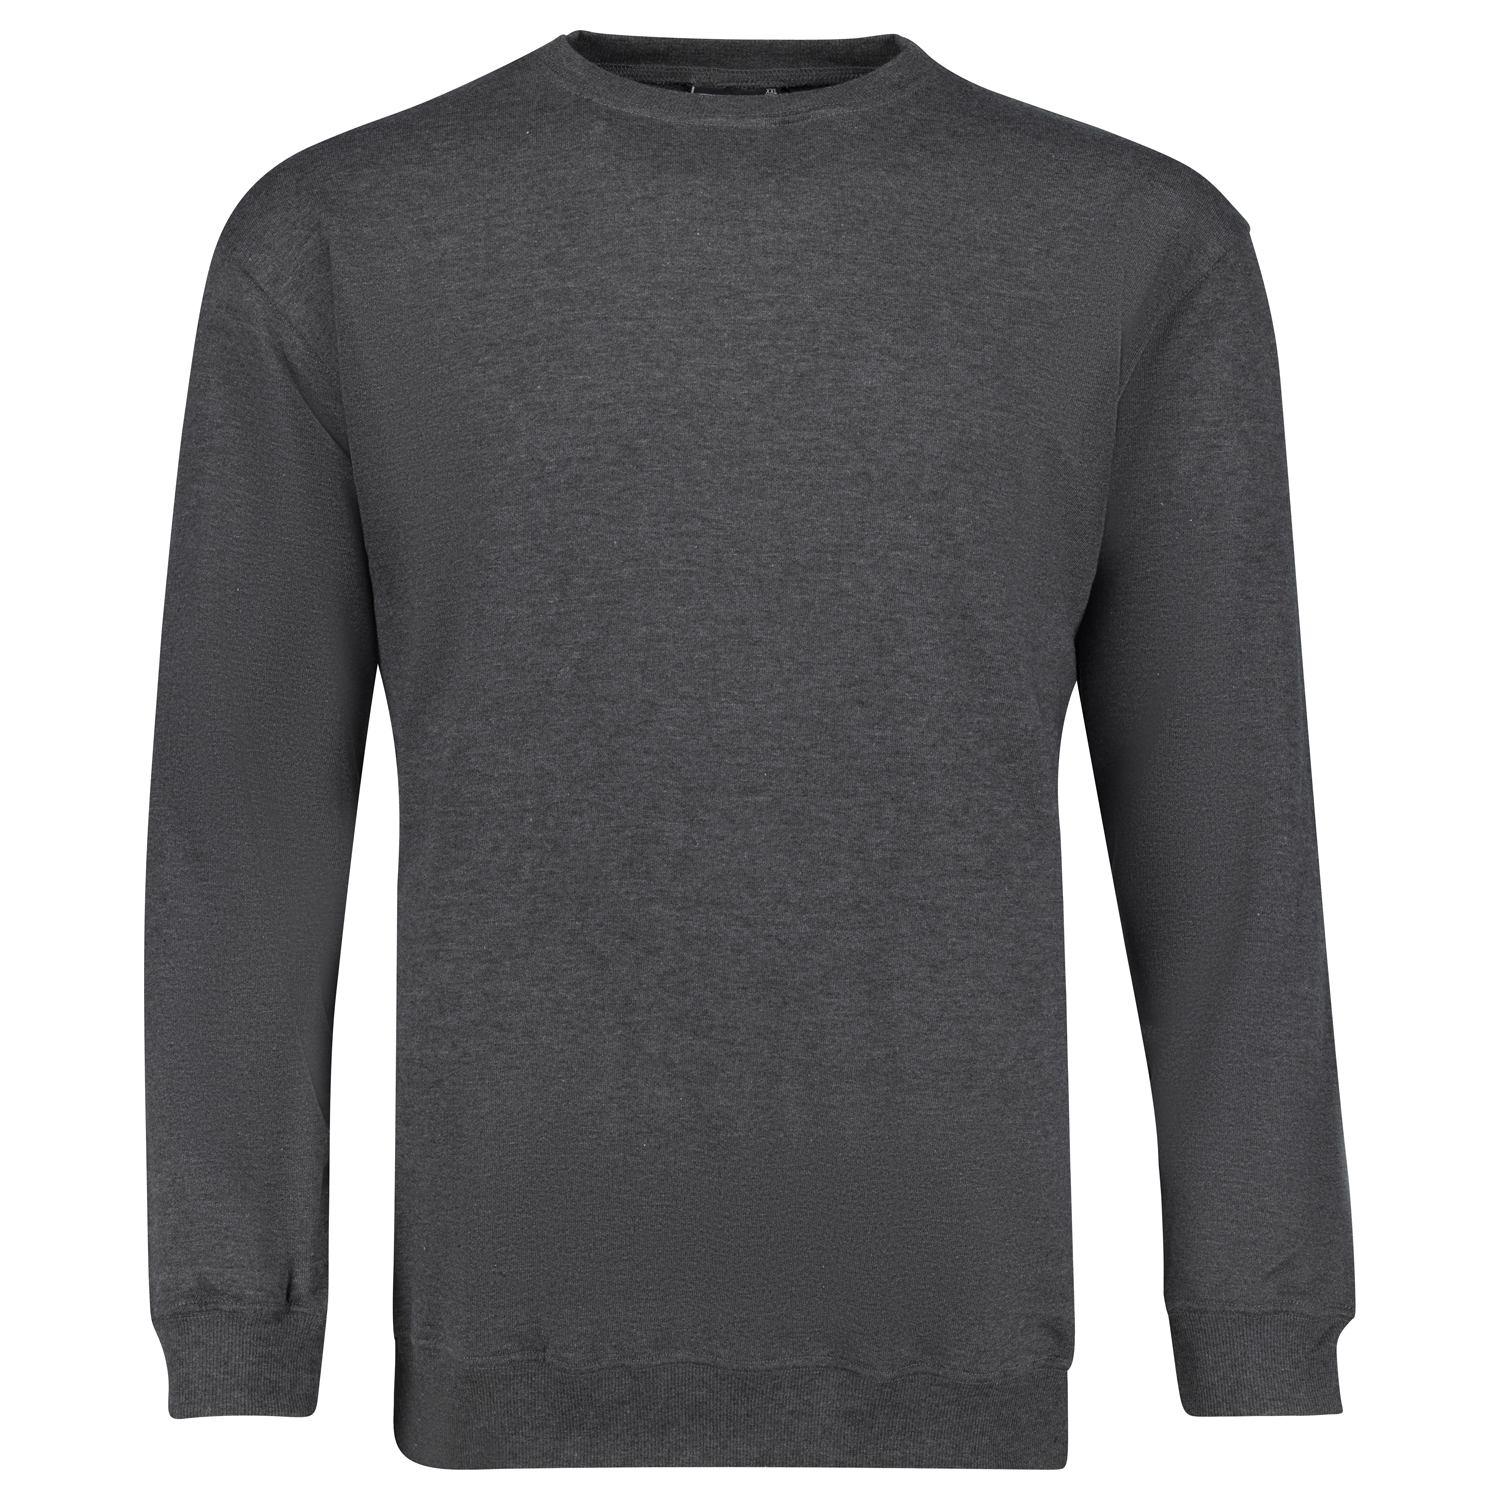 Sweatshirt series "ATHEN" in anthracite mottled by ADAMO for men up to oversize 14XL